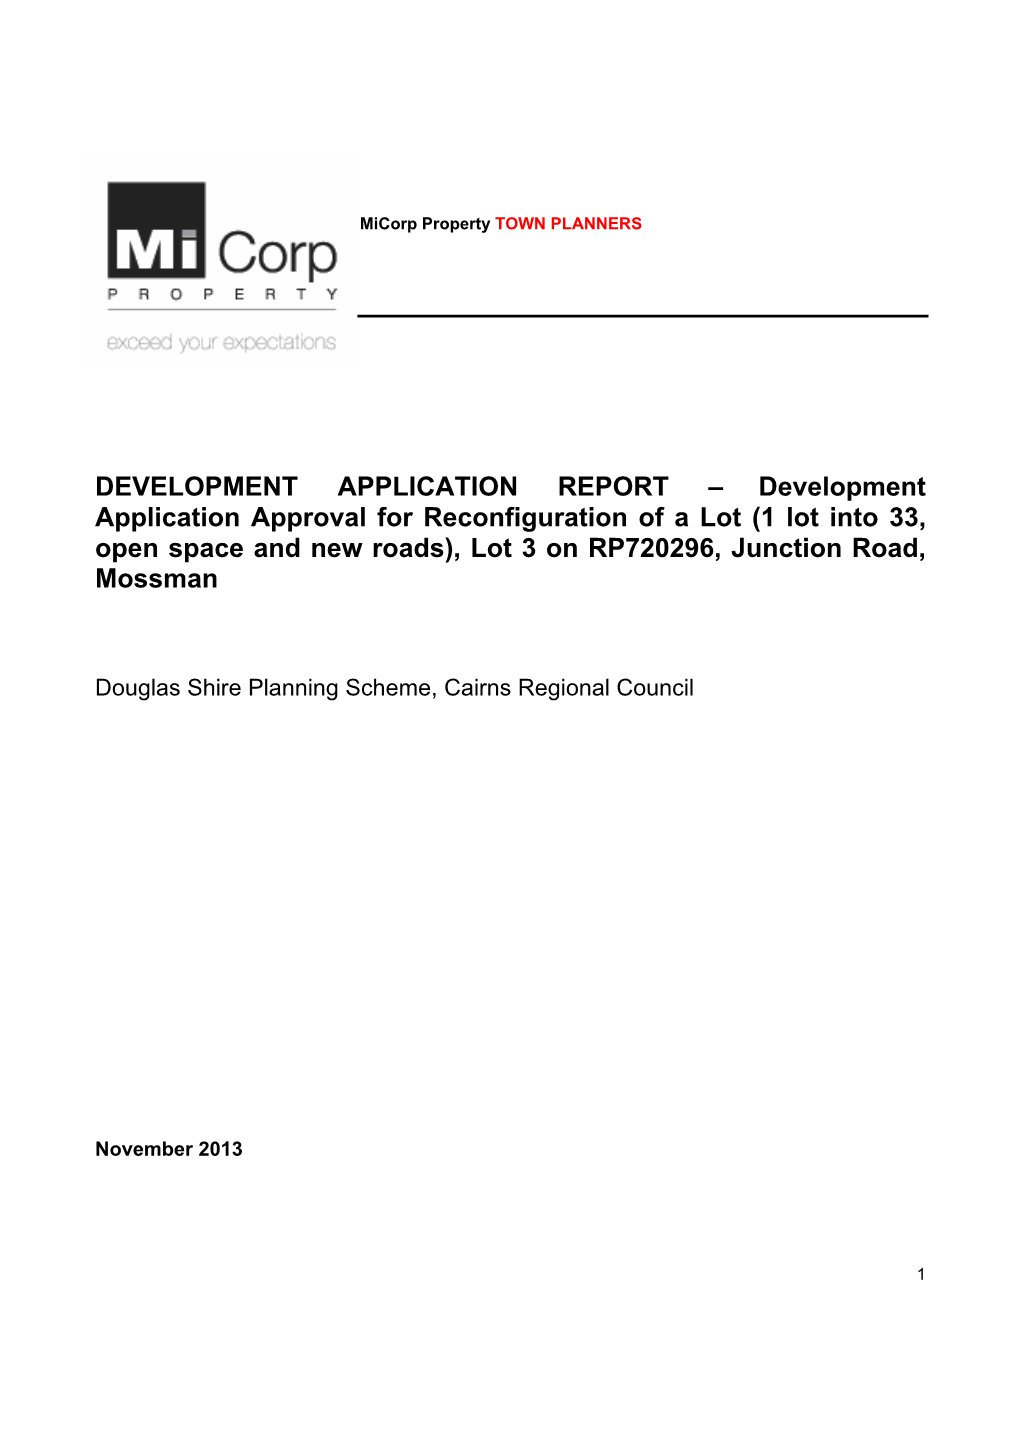 Development Application Approval for Reconfiguration of a Lot (1 Lot Into 33, Open Space and New Roads), Lot 3 on RP720296, Junction Road, Mossman